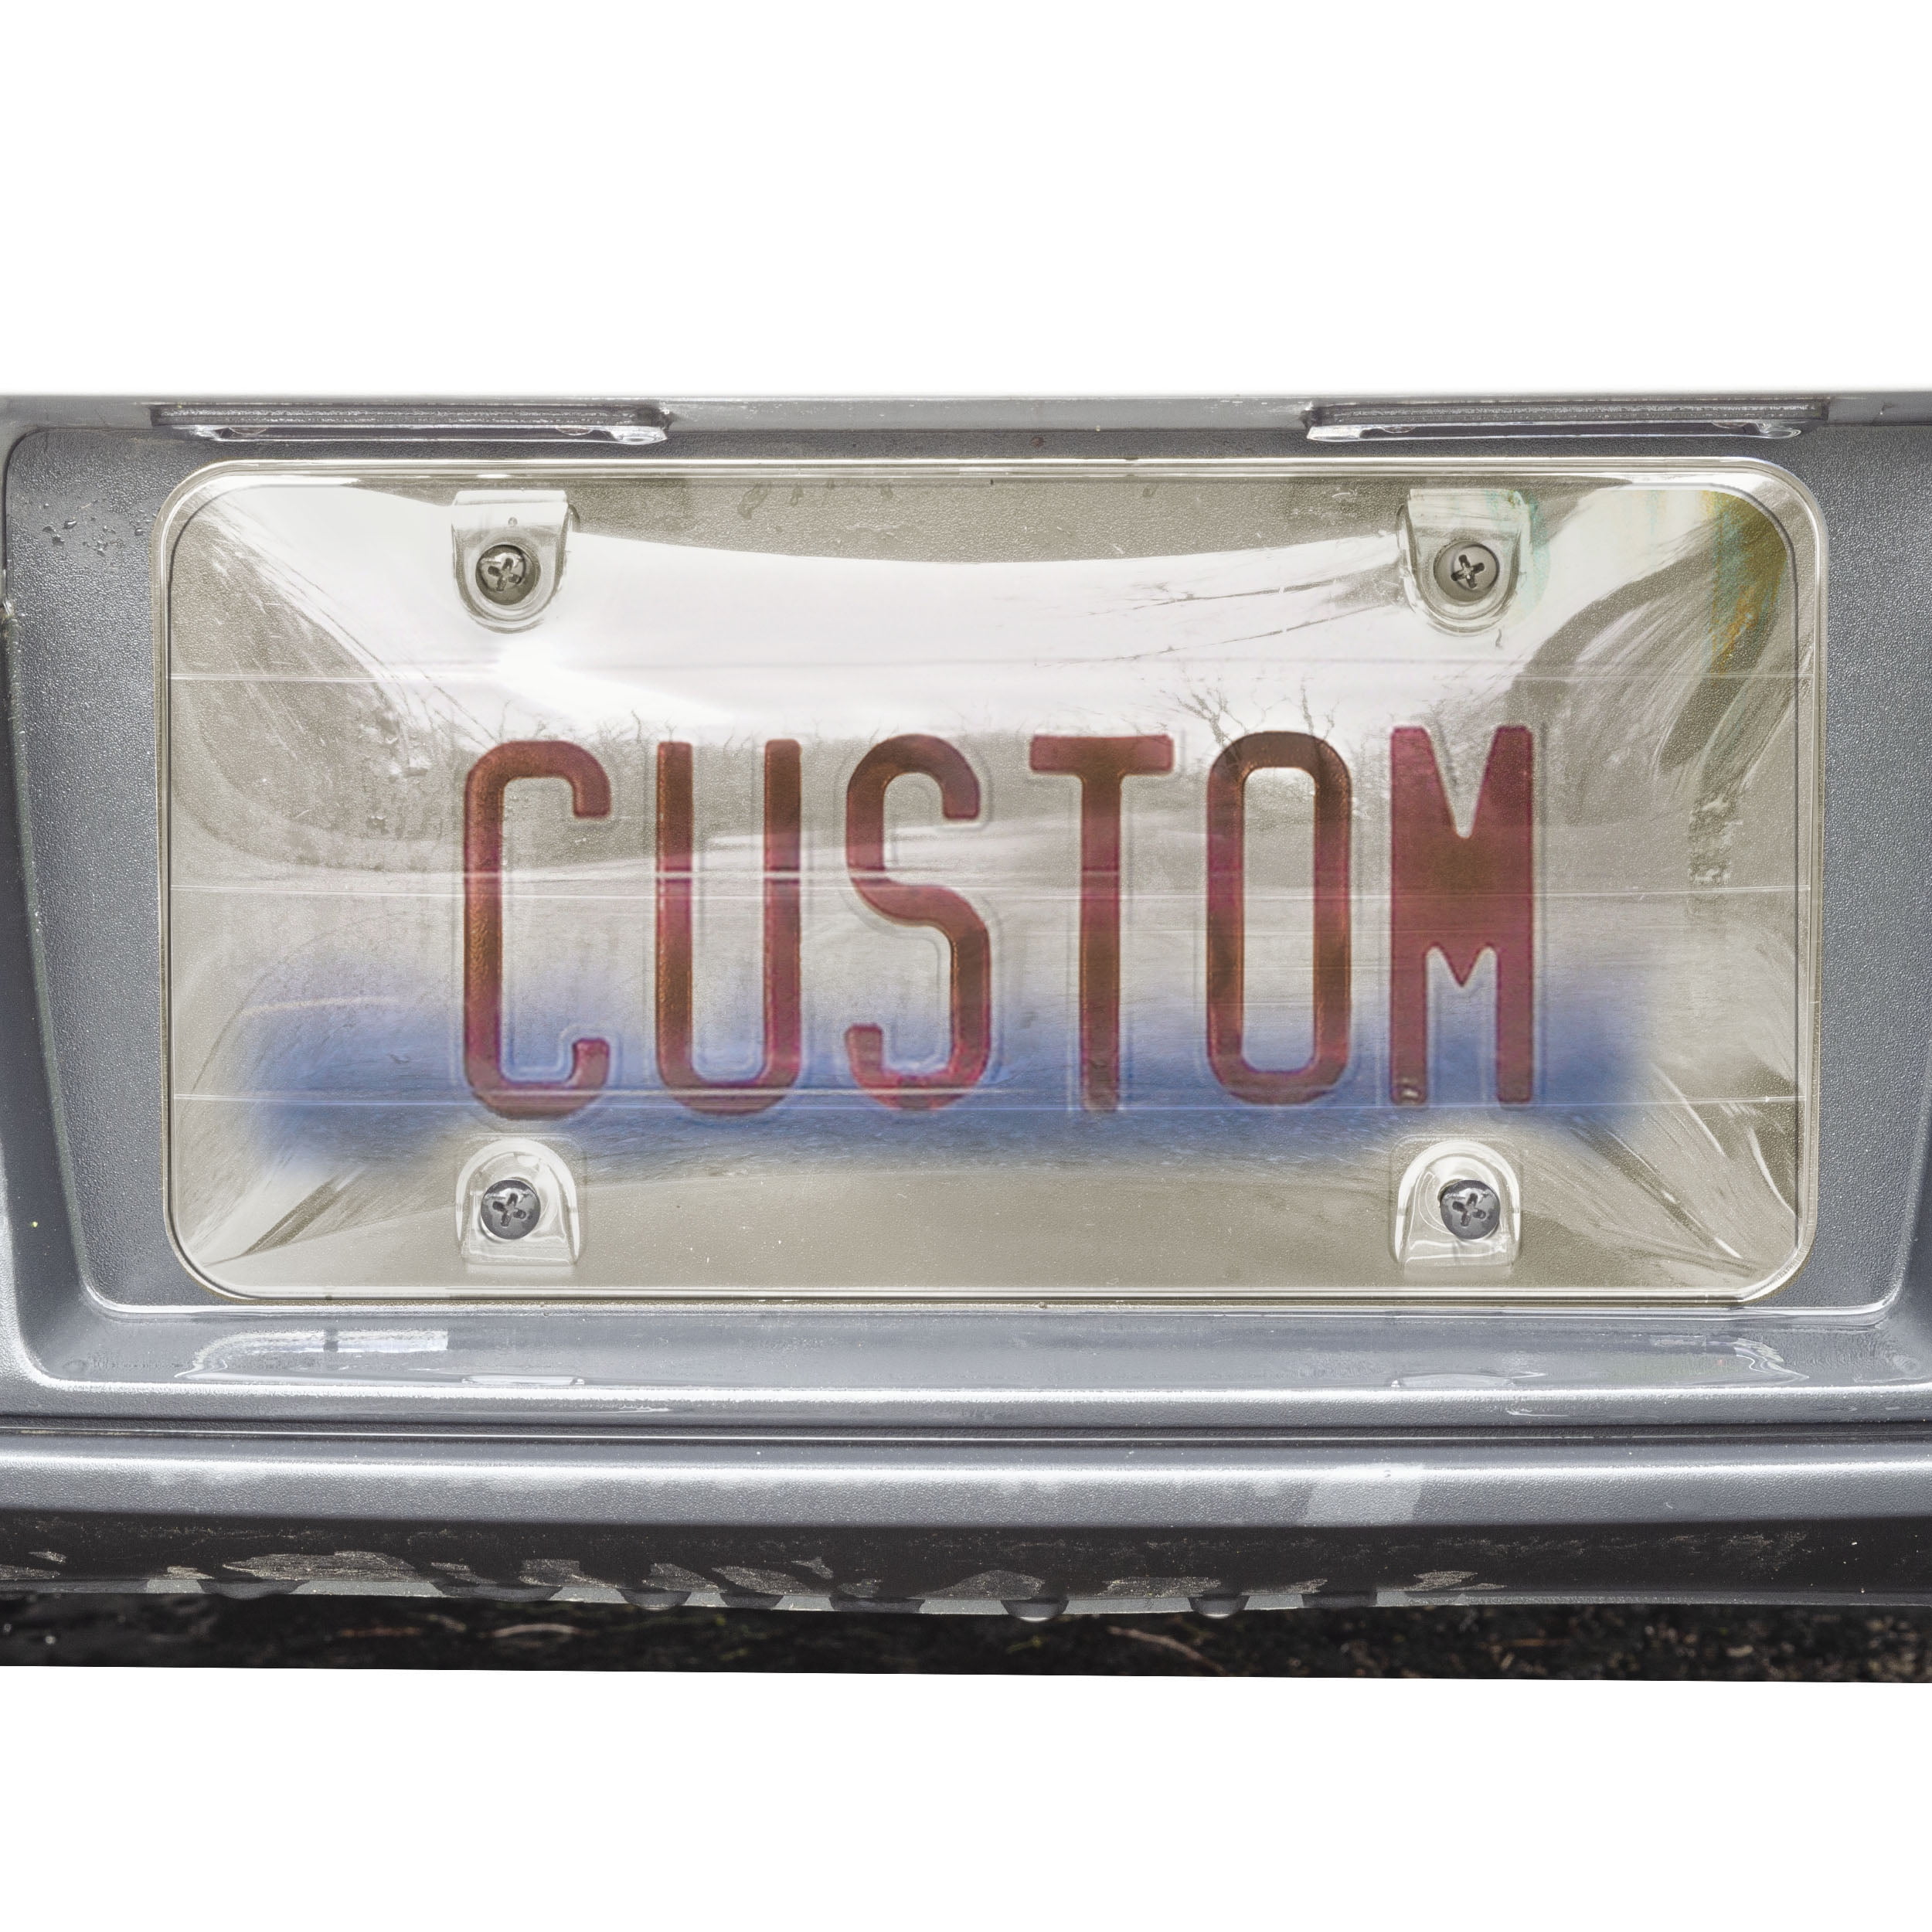 Creeps Halloween Horror Movies License Plate Covers Women Men Tint Black Car Frames Funny Front Aluminum Metal Auto Tag Novelty Front Vanity Decor Art Plate Signs Truck RV Trailer Women Men 6X12inch 